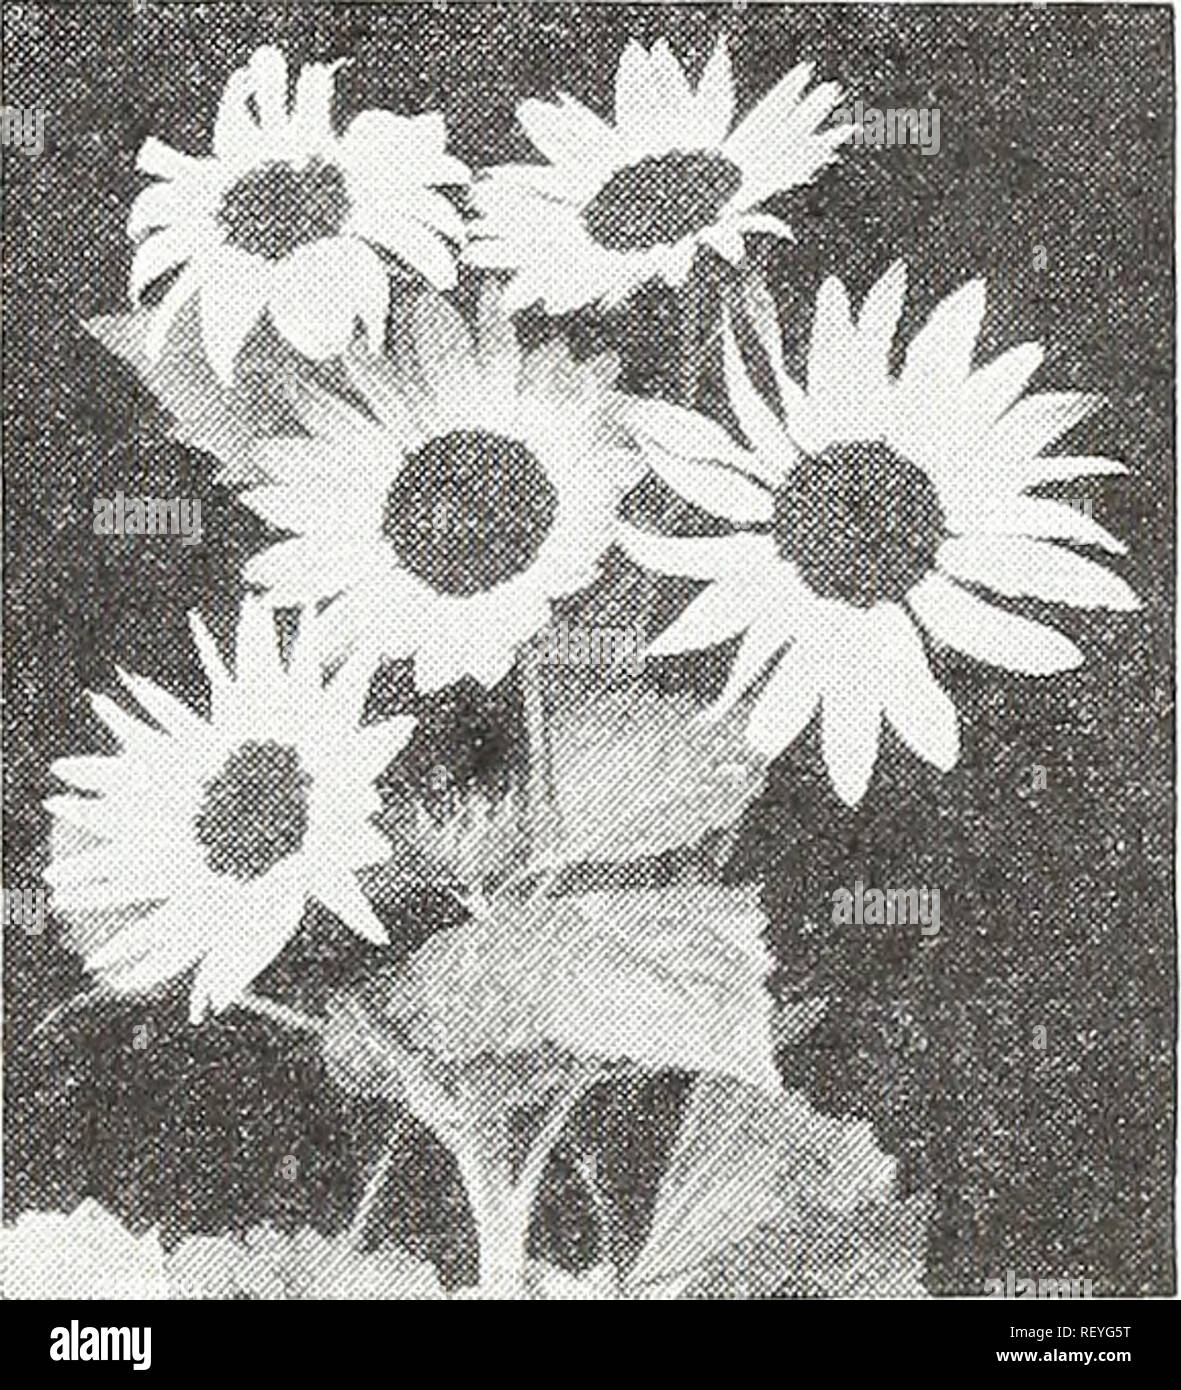 . Dreer's novelties and specialties for 1948 : three superb zinnias for every garden. Flowers Seeds Catalogs; Vegetables Seeds Catalogs; Nurseries (Horticulture) Catalogs; Gardening Equipment and supplies Catalogs. Dahlborg Daisy DahEborg Daisy ® A 2121 {Thymophylla tenuiloba) A splendid dwarf plant, 6 in. high, forming cushions 8 in. across. The lemon-scented foliage is studded freely with tiny daisy-like blossoms of a brilliant rich golden-yellow color. Flowers from late spring until fall. Excellent for beds and edging. Pkt. 2Sc; large pkt. 7Sc.. Helianthus, Gerbera-Toned Heiianthus -Sunjiow Stock Photo